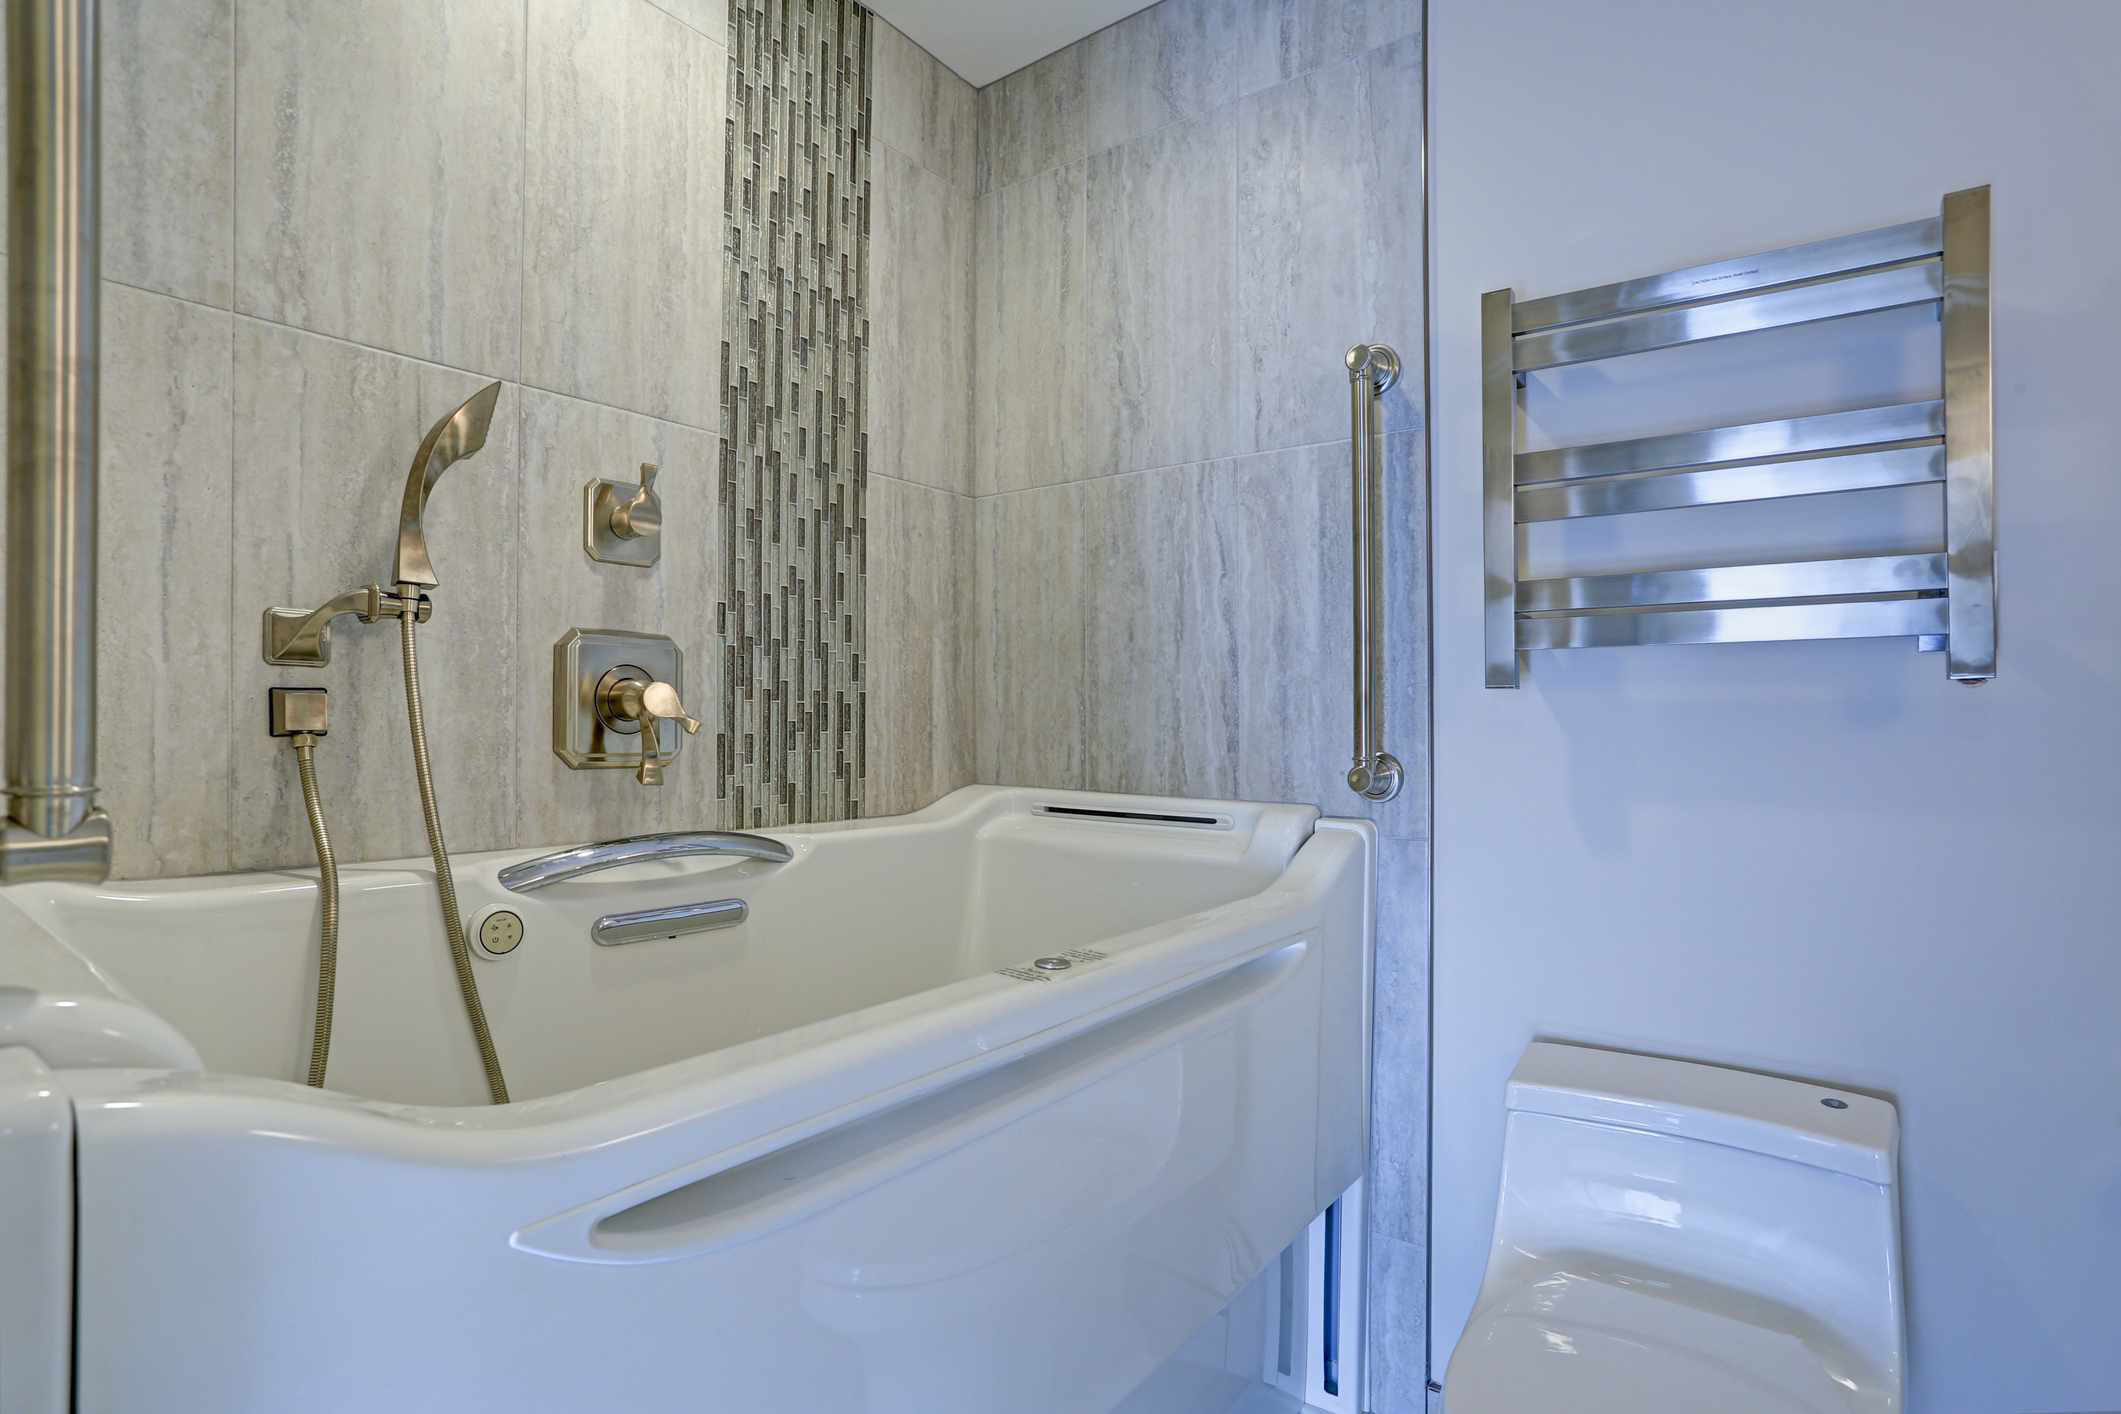 How Much Does a Walk-in Tub Cost? Here's What to Know